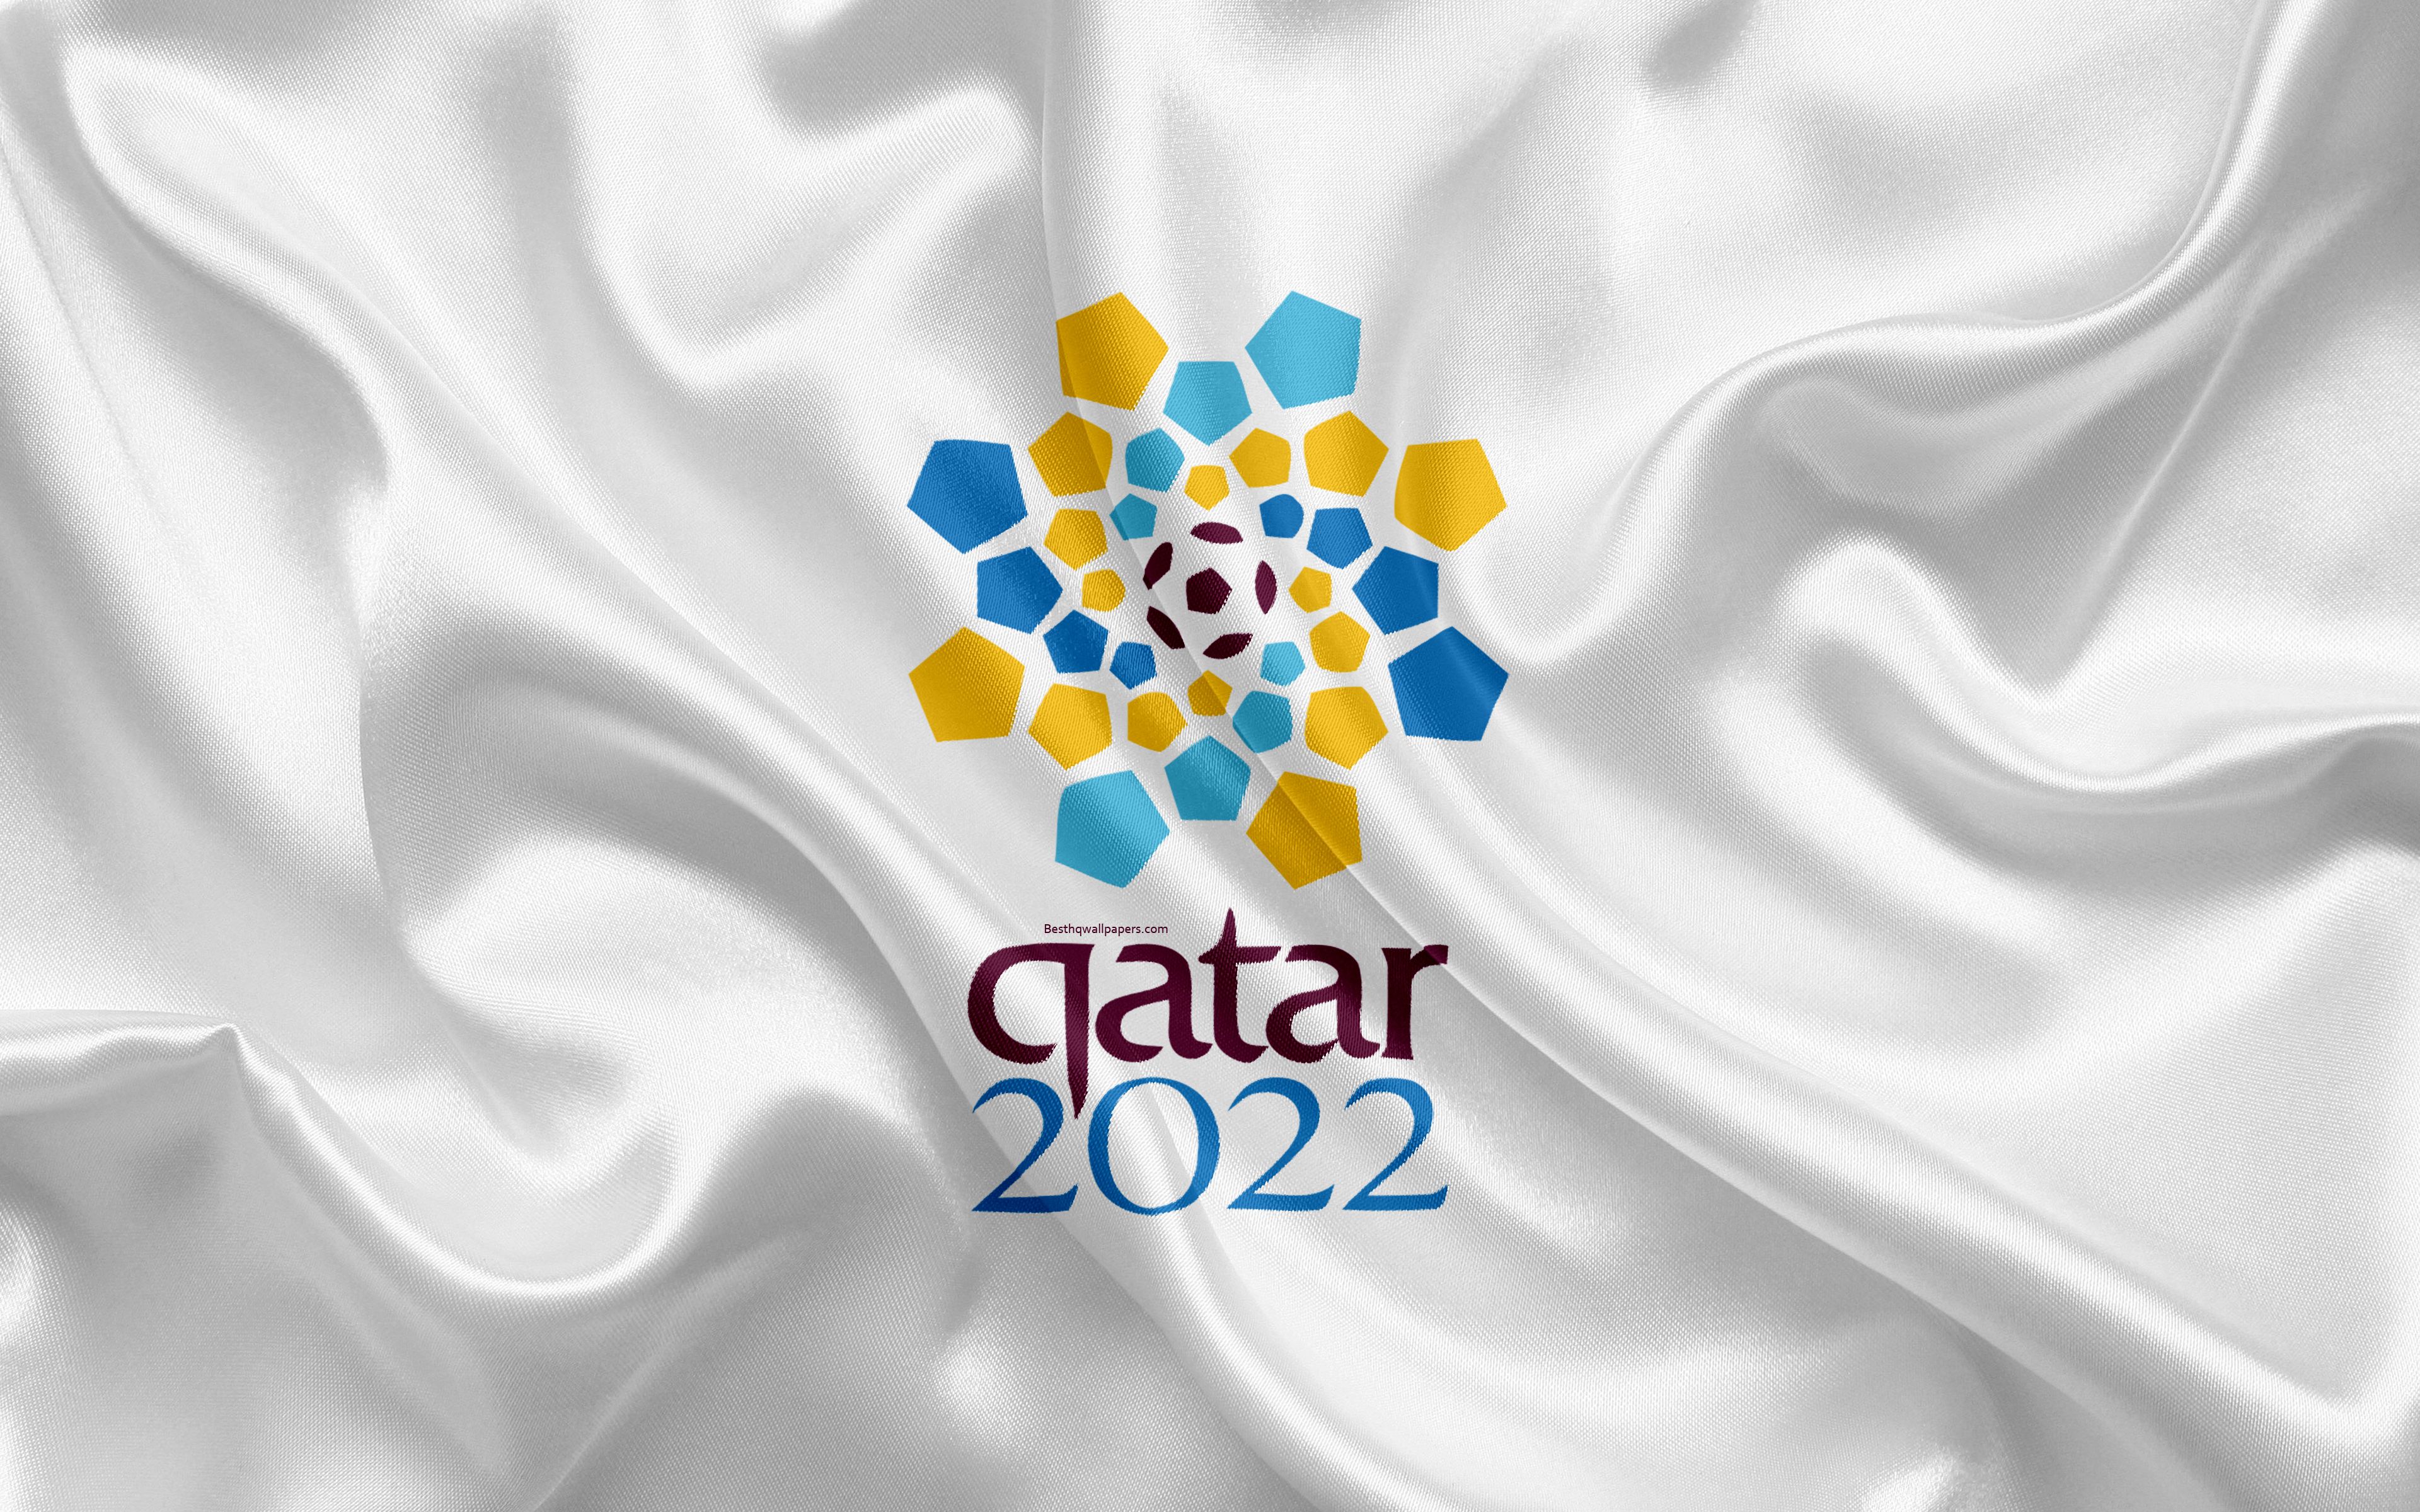 Download wallpaper Qatar 4k, logo, emblem, football, 2022 FIFA World Cup, Soccer World Cup, Qatar for desktop with resolution 3840x2400. High Quality HD picture wallpaper